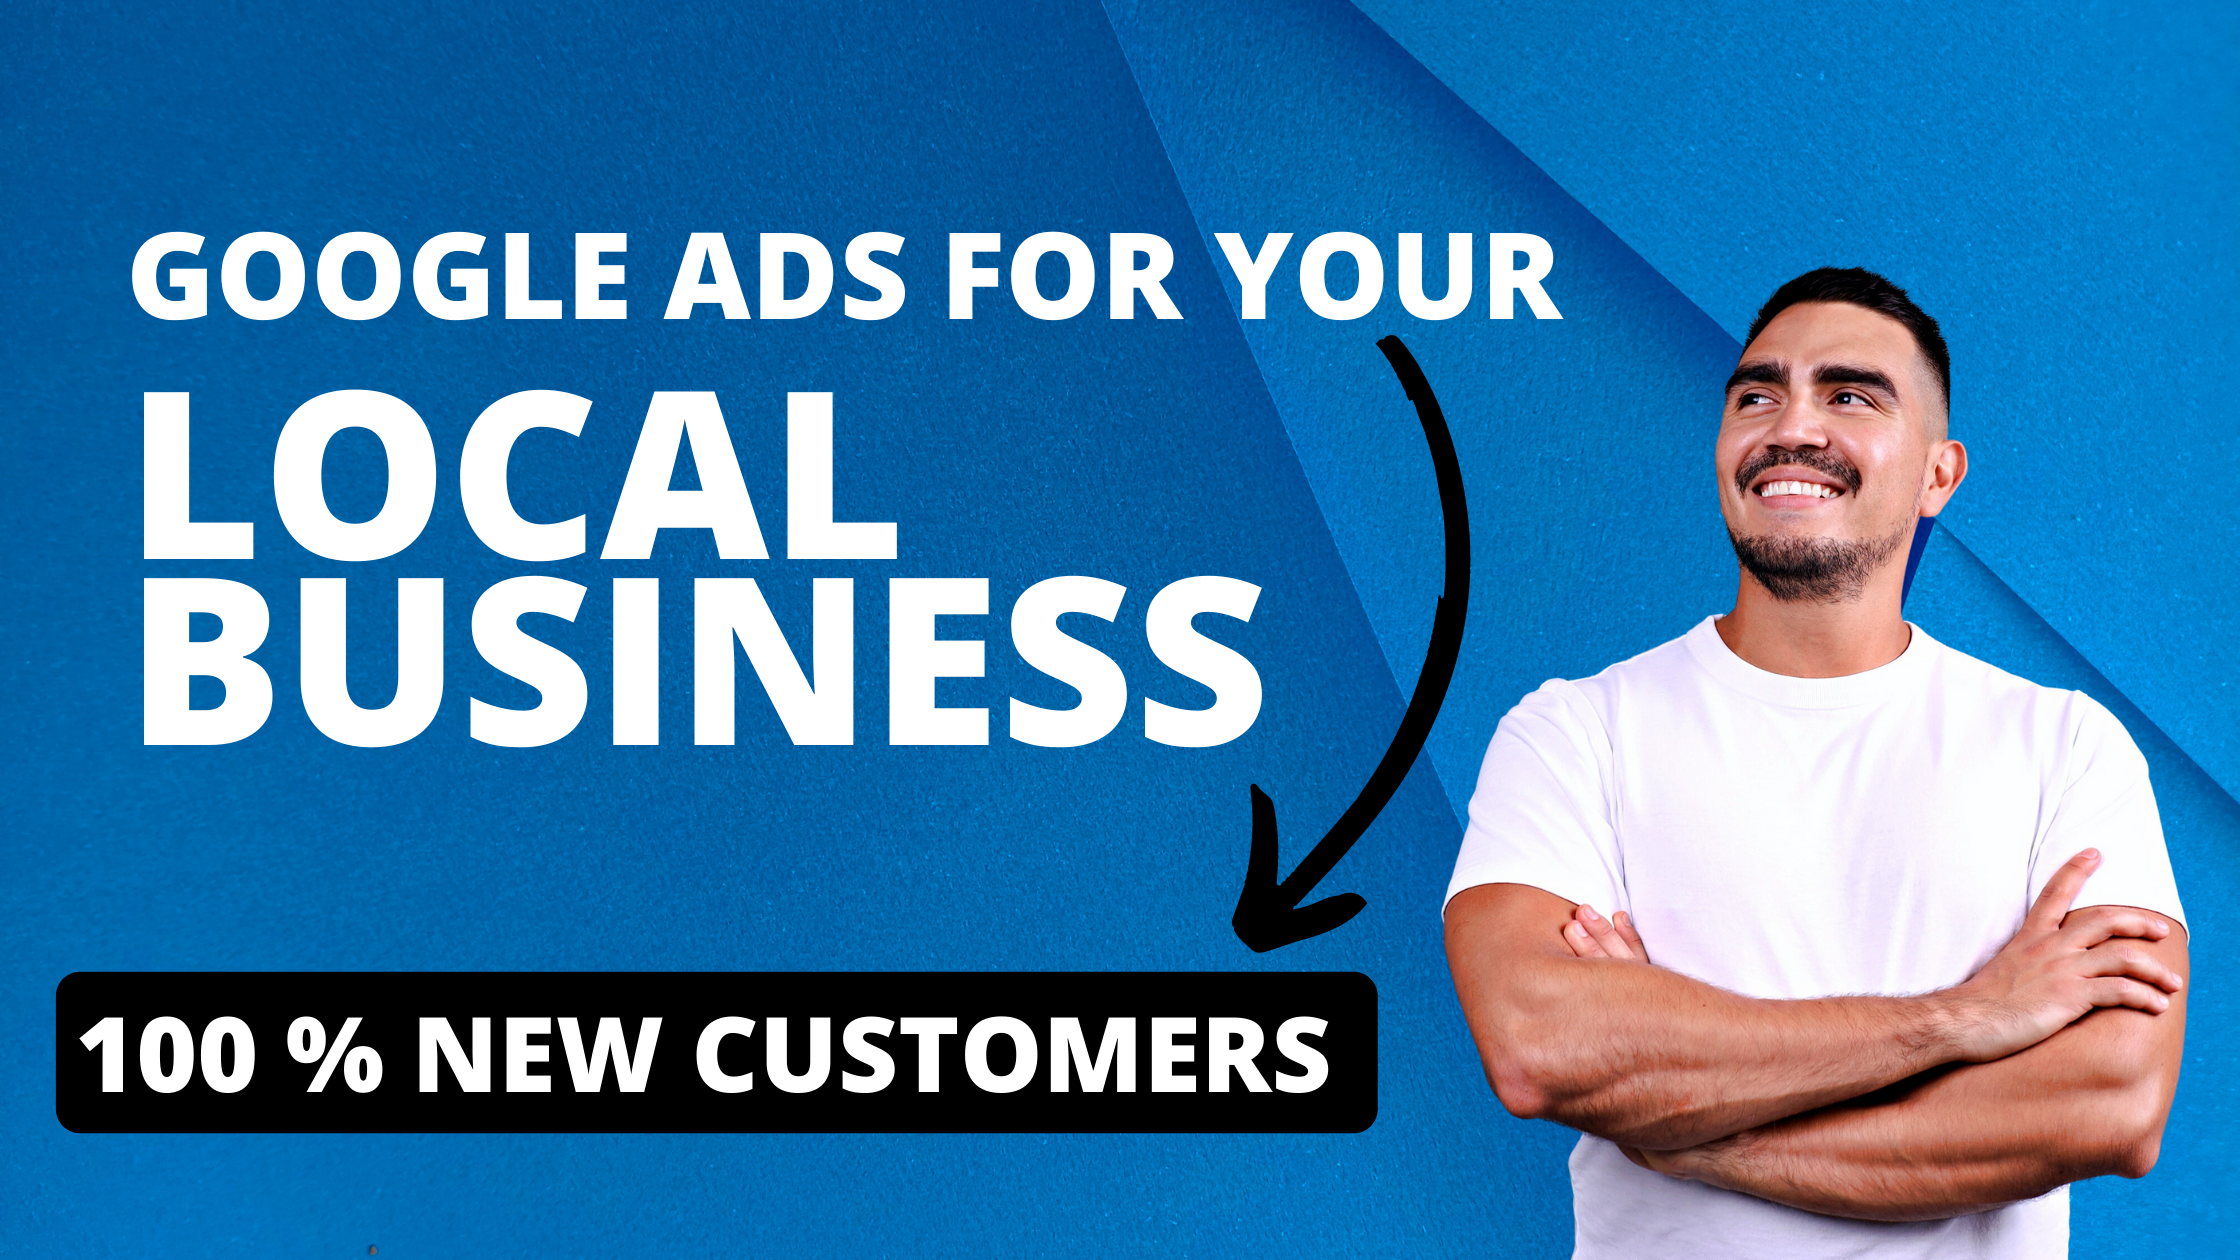 If you have a local business then you need to do Google Ads.